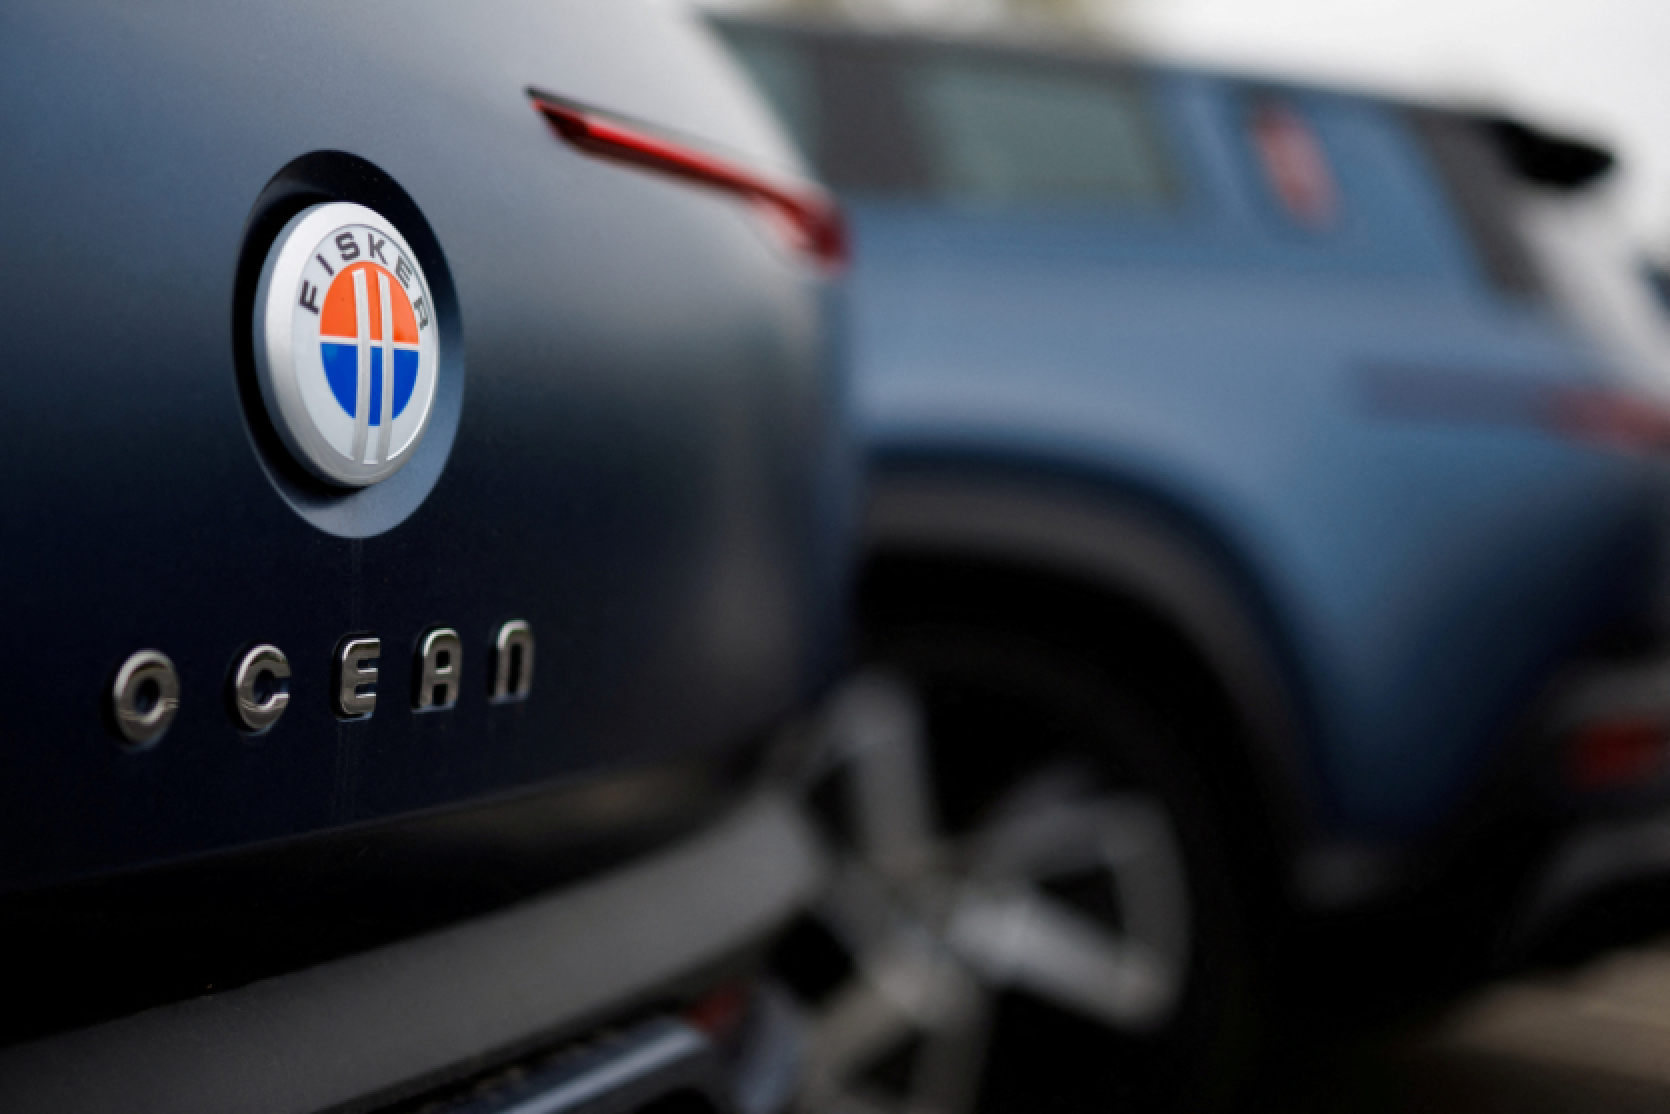 From $2500 for an electric car - bankrupt Fisker plans to sell off its fleet for cheap